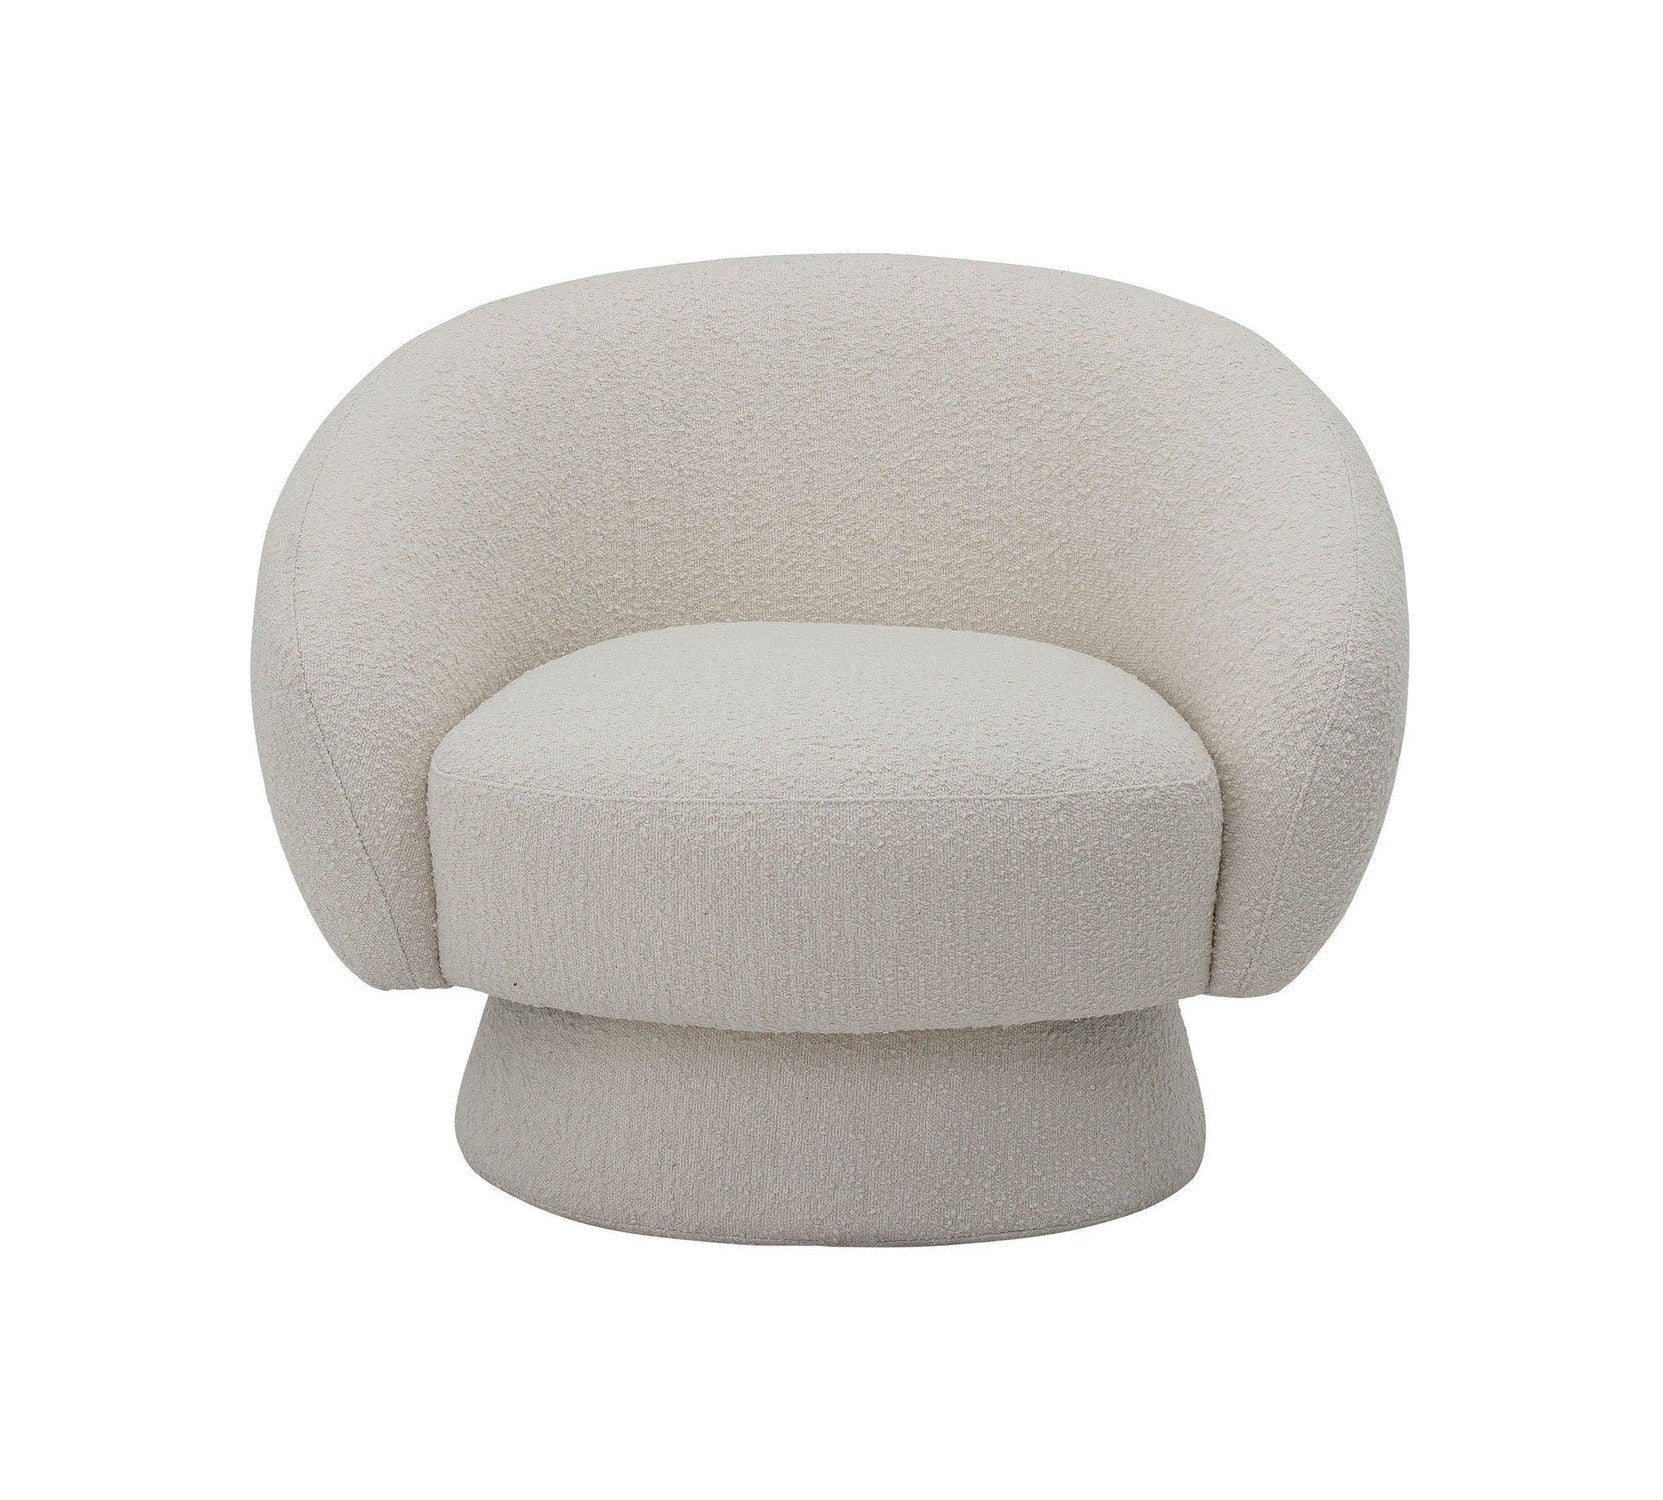 Sedia a lounge Bloomingville Ted, bianco, poliestere